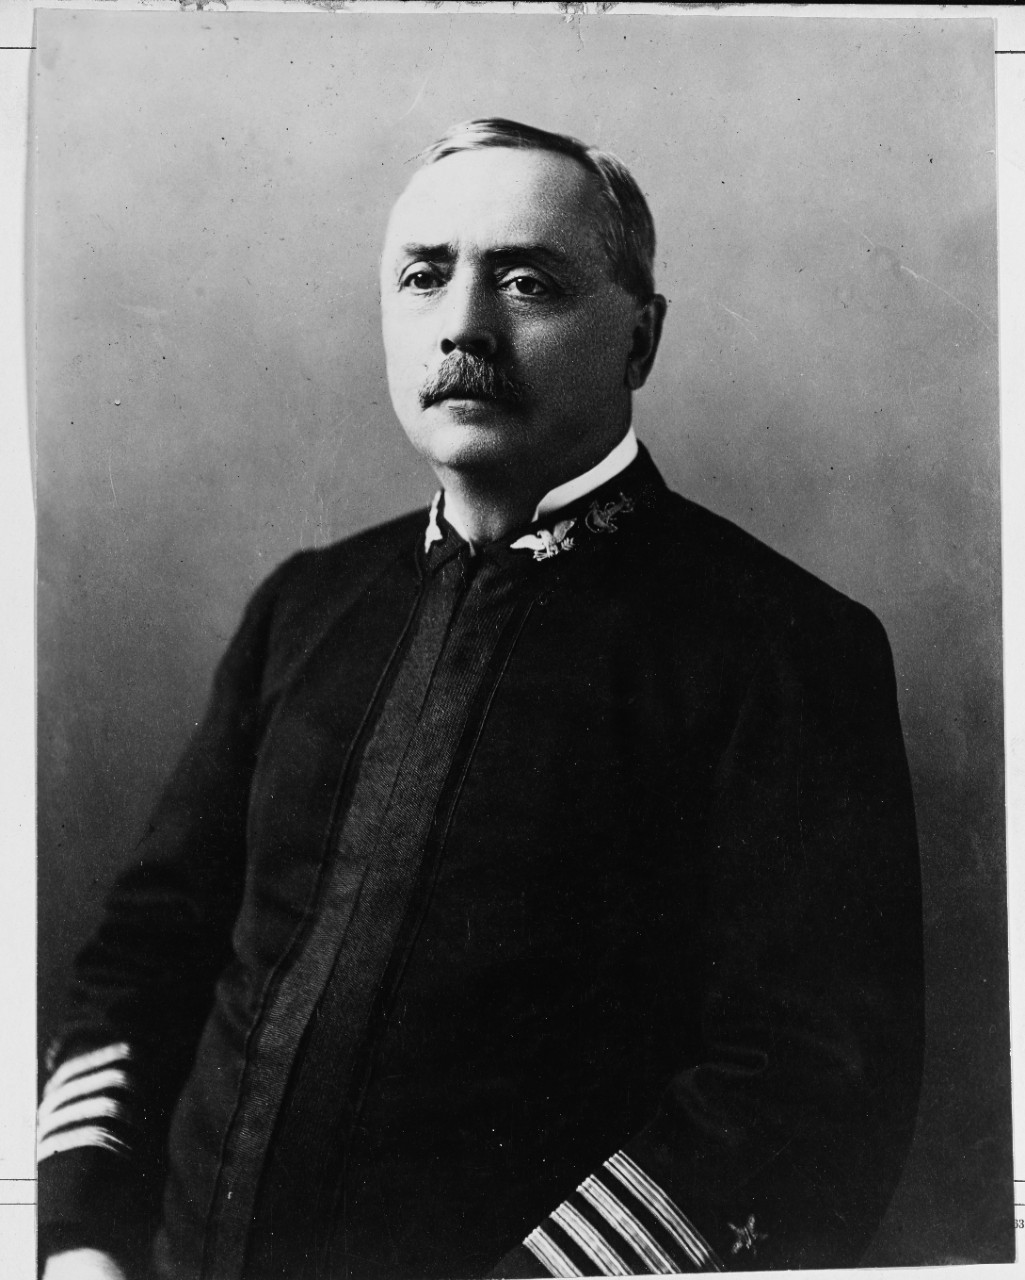 Captain Royal Rodney Ingersoll, United States Navy, in command of the USS MARYLAND (CA-8), 1906.